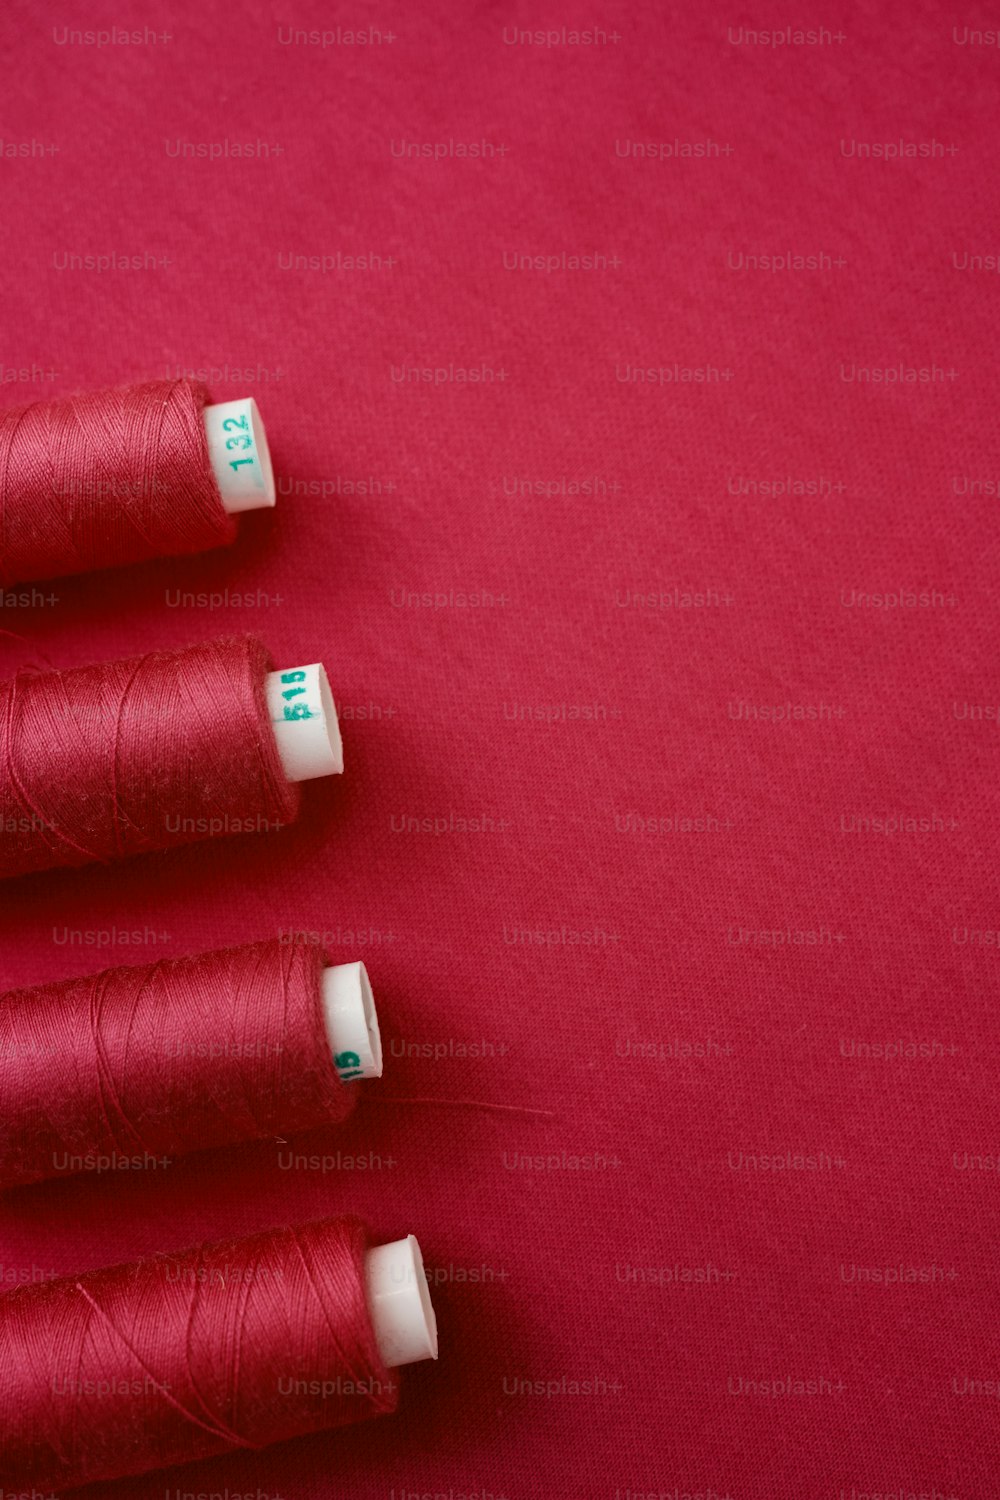 three spools of thread on a red surface